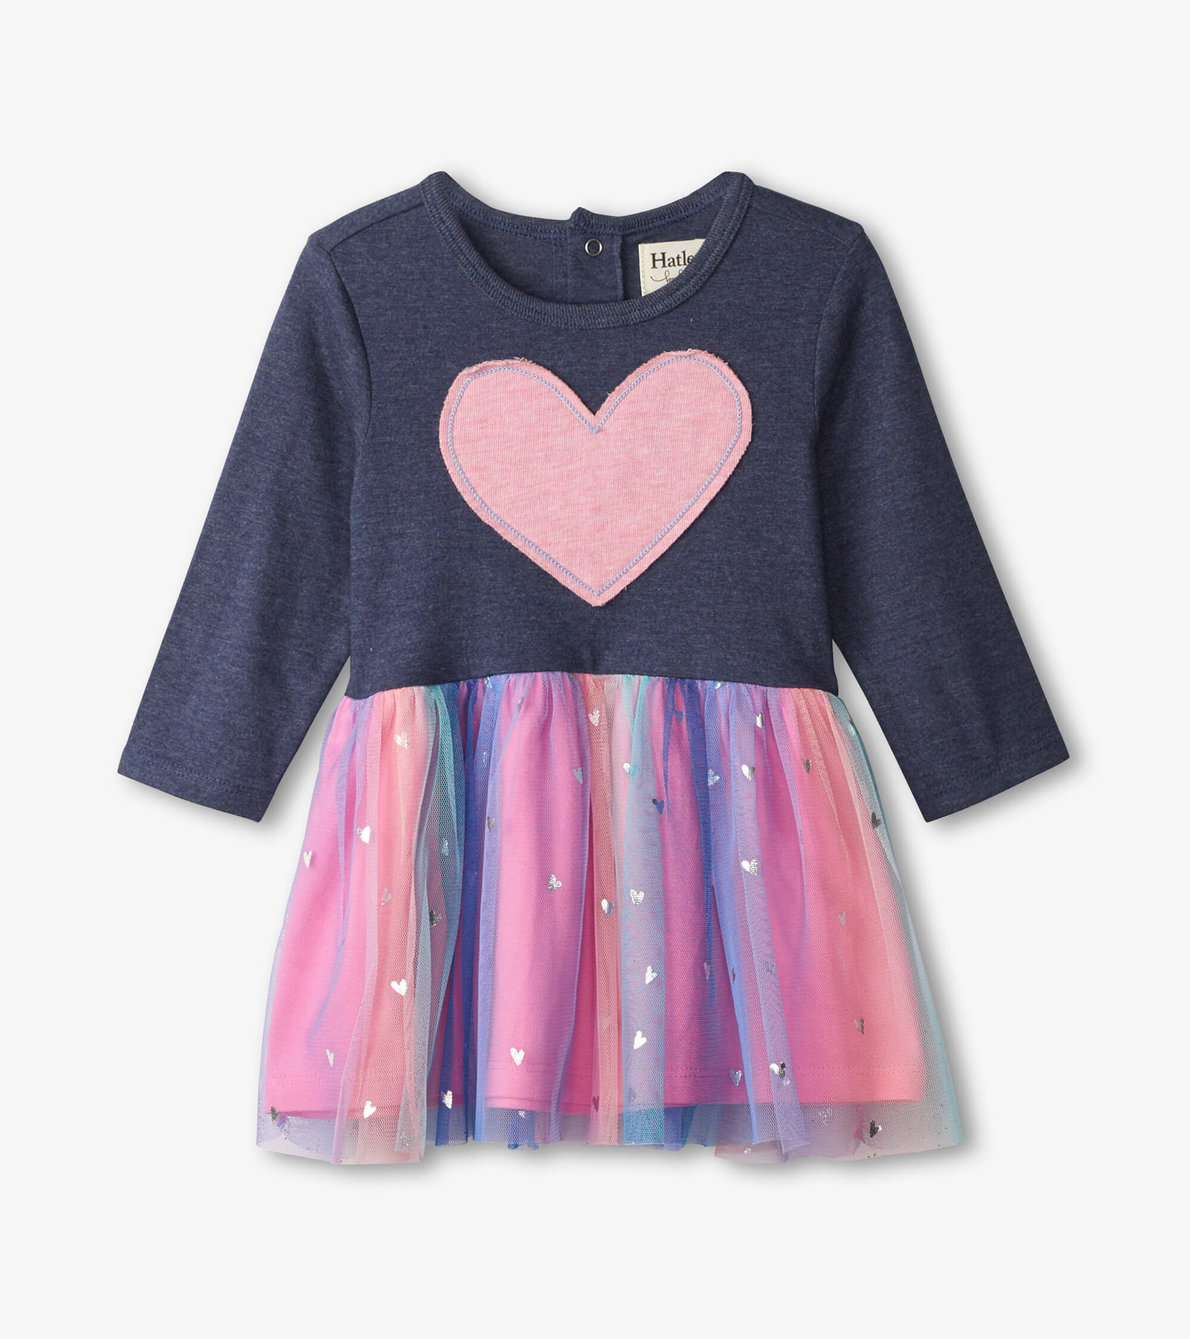 View larger image of Twinkle Hearts Baby Mix Media Dress